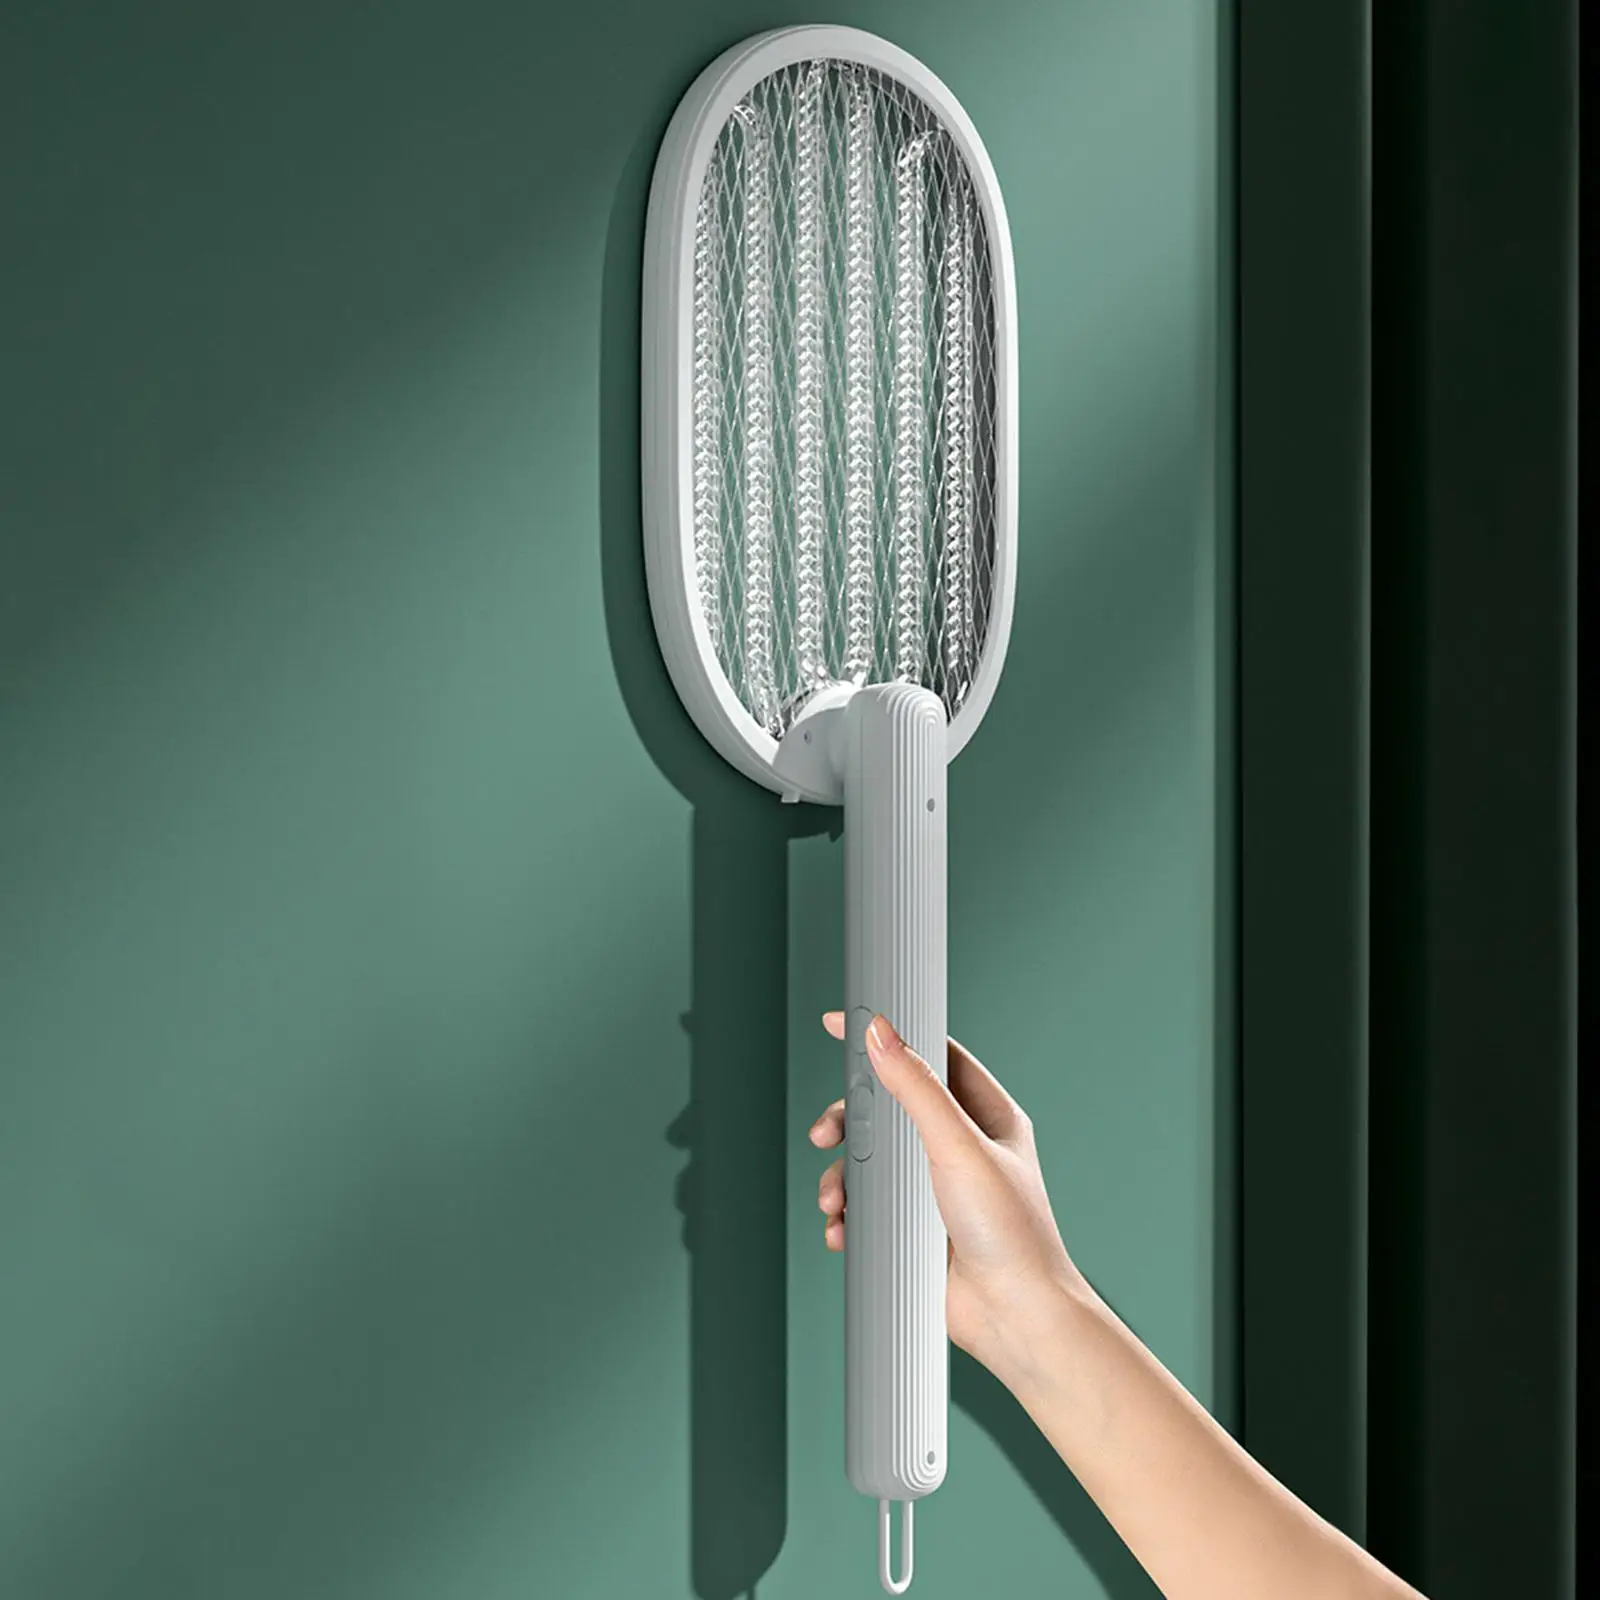 USB Rechargeable Fly Swatter 2 in 1 Folding Automatic for Kitchen, Summer, Home,